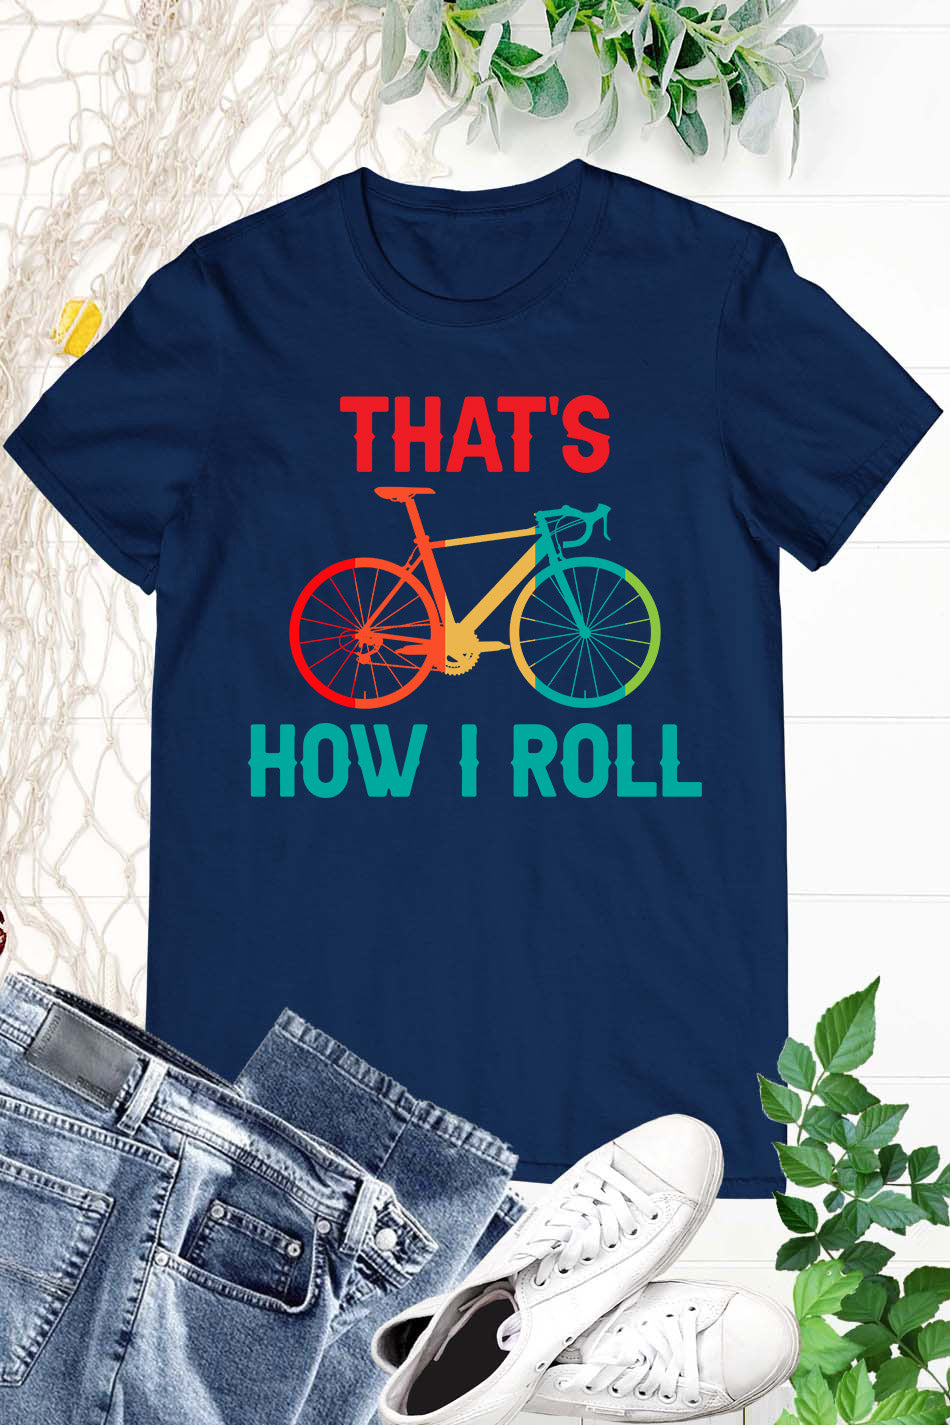 That’s How I Roll Men’s Bicycle T Shirt